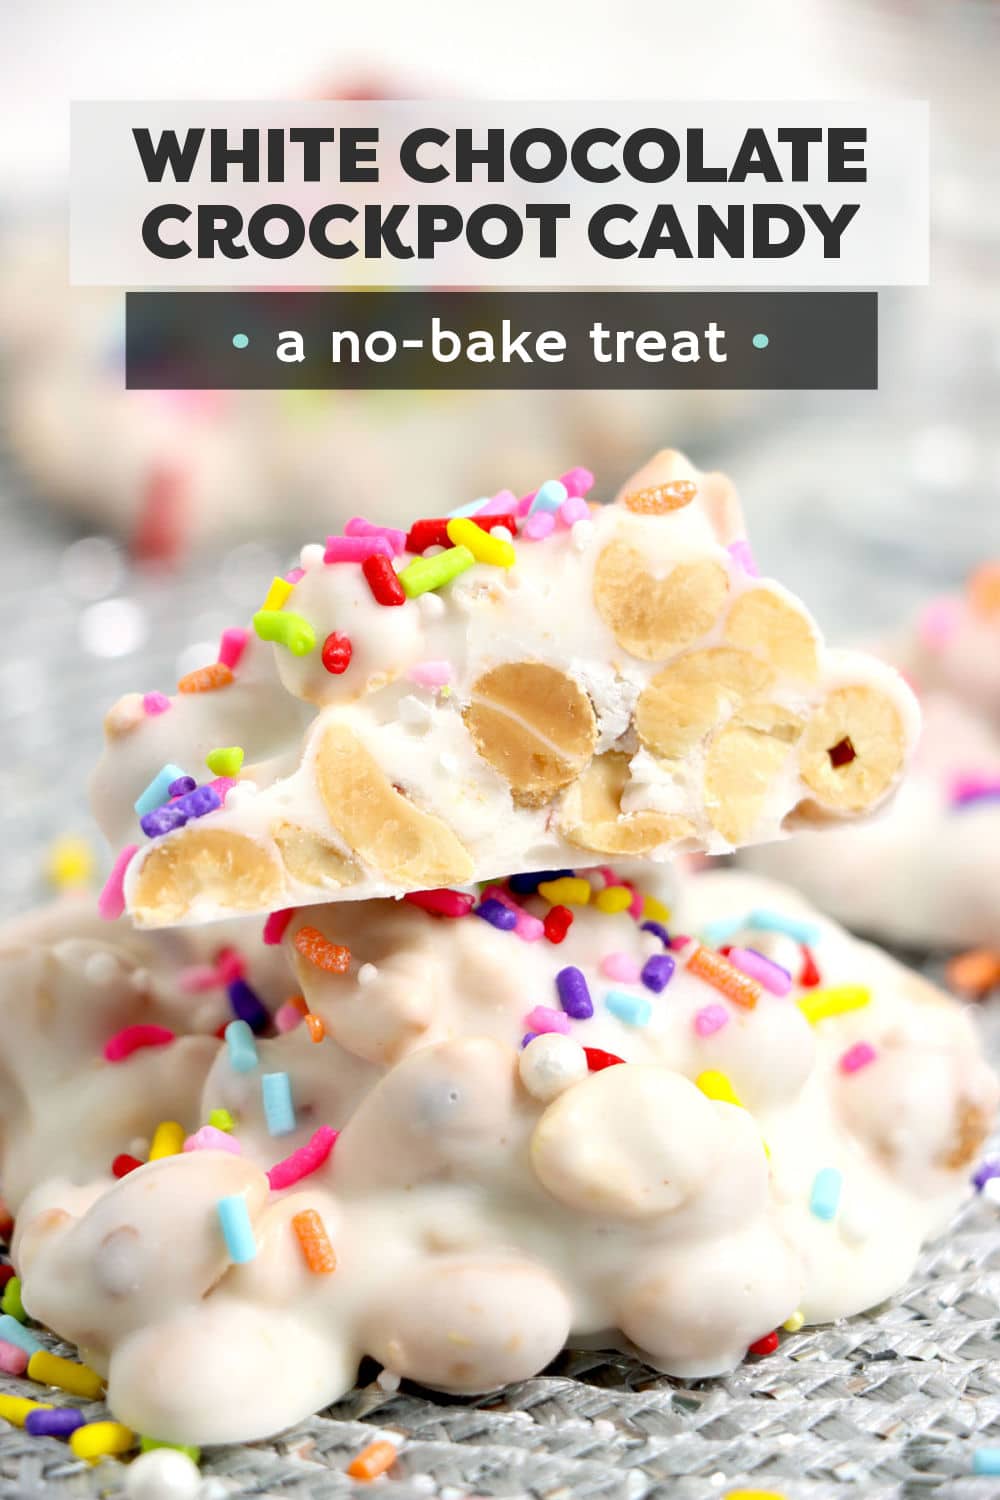 Three ingredient White Chocolate Crockpot Candy is one of the easiest desserts you can make! All you need are some peanuts, white candy melts, and colorful sprinkles for whichever occasion you're celebrating. | www.persnicketyplates.com